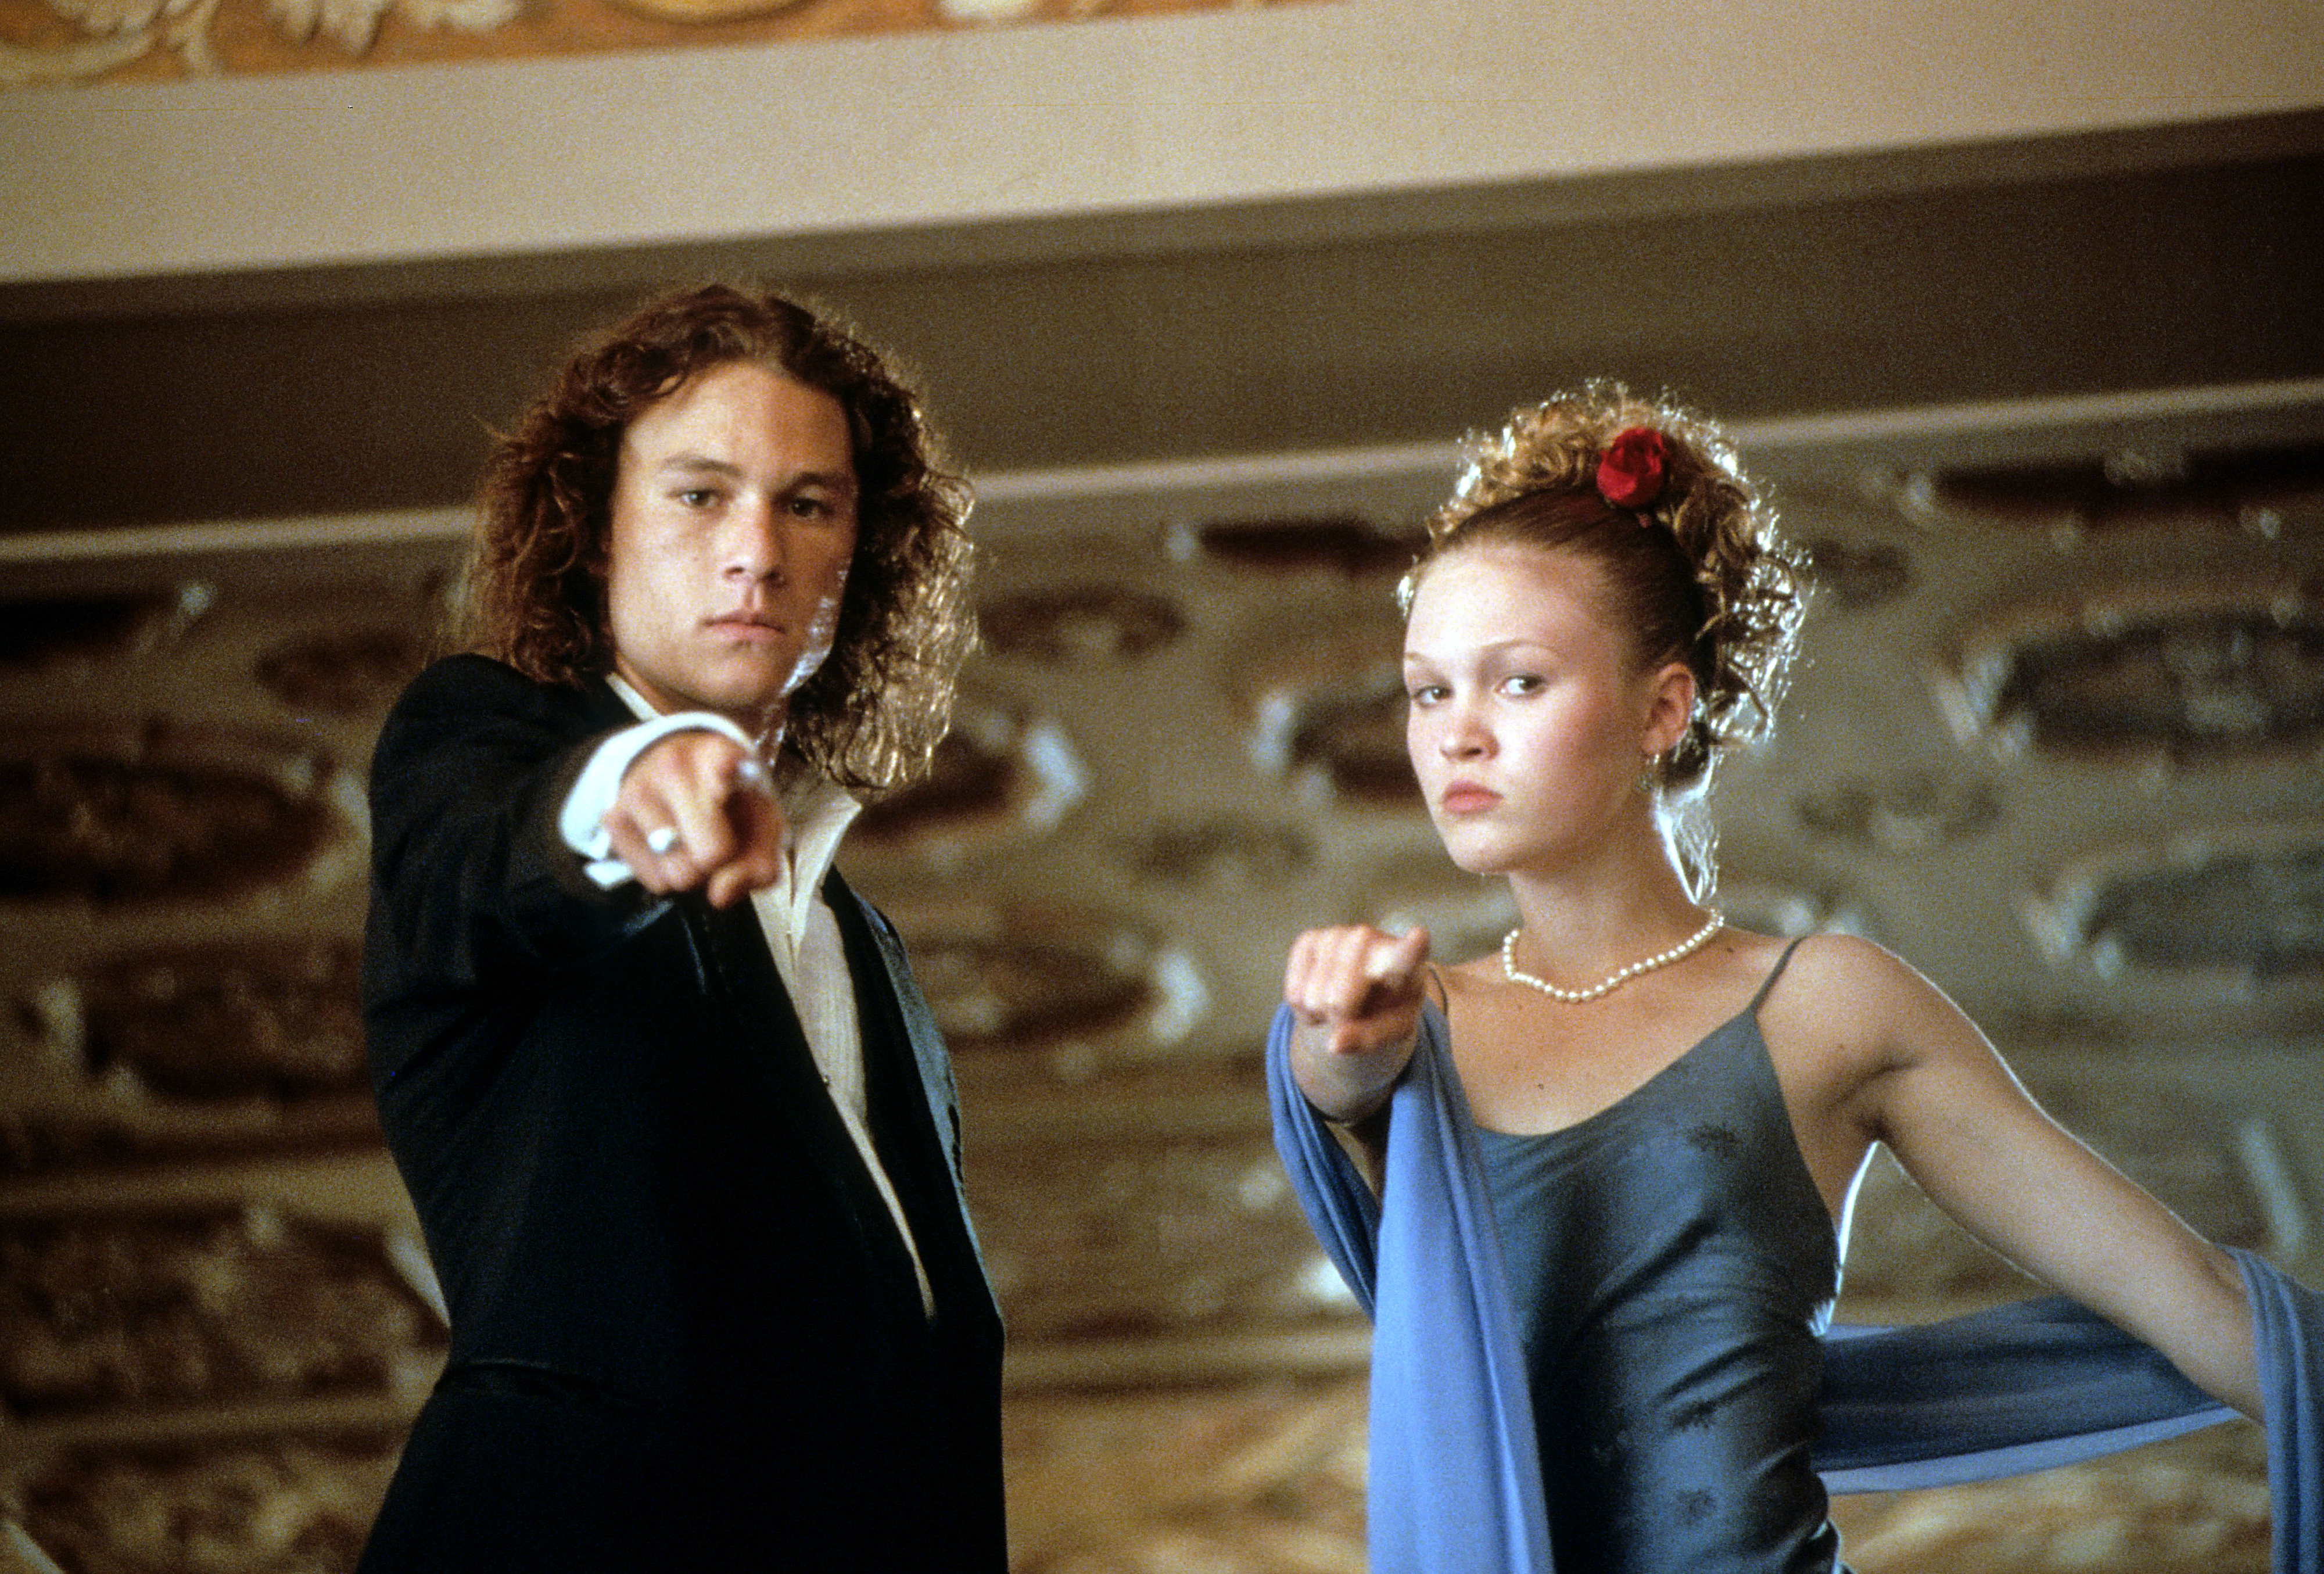 Heath and Julia pointing in the movie